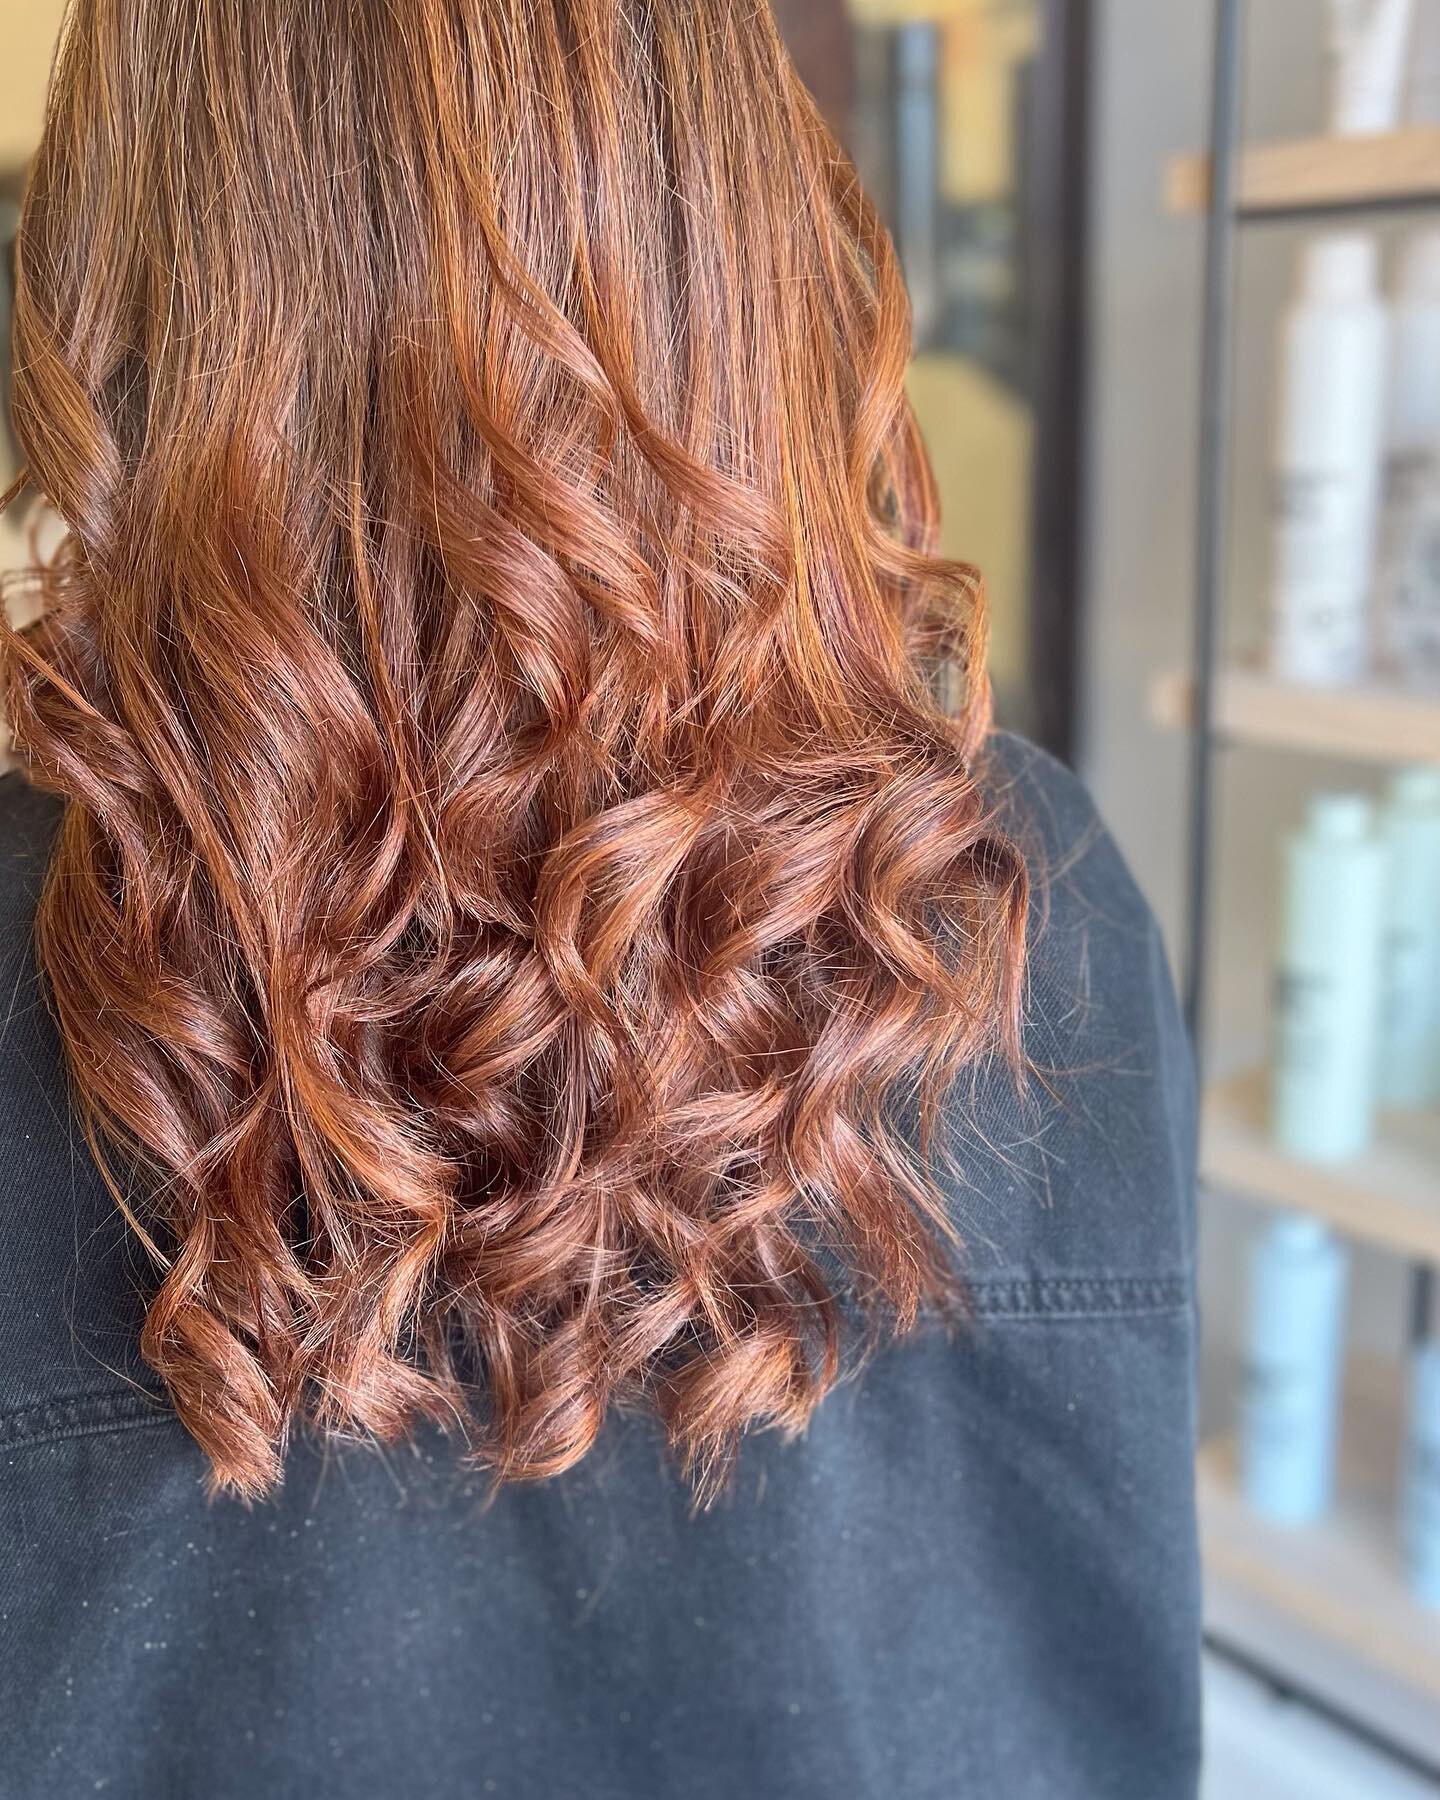 TREAT YOURSELF THIS SPRING TO A STYLING SESSION! 

You deserve to walk around with an aura of confidence and class, bring good vibes into every room you walk into and get your hair styled by one of our professional hairstylists just like in this phot